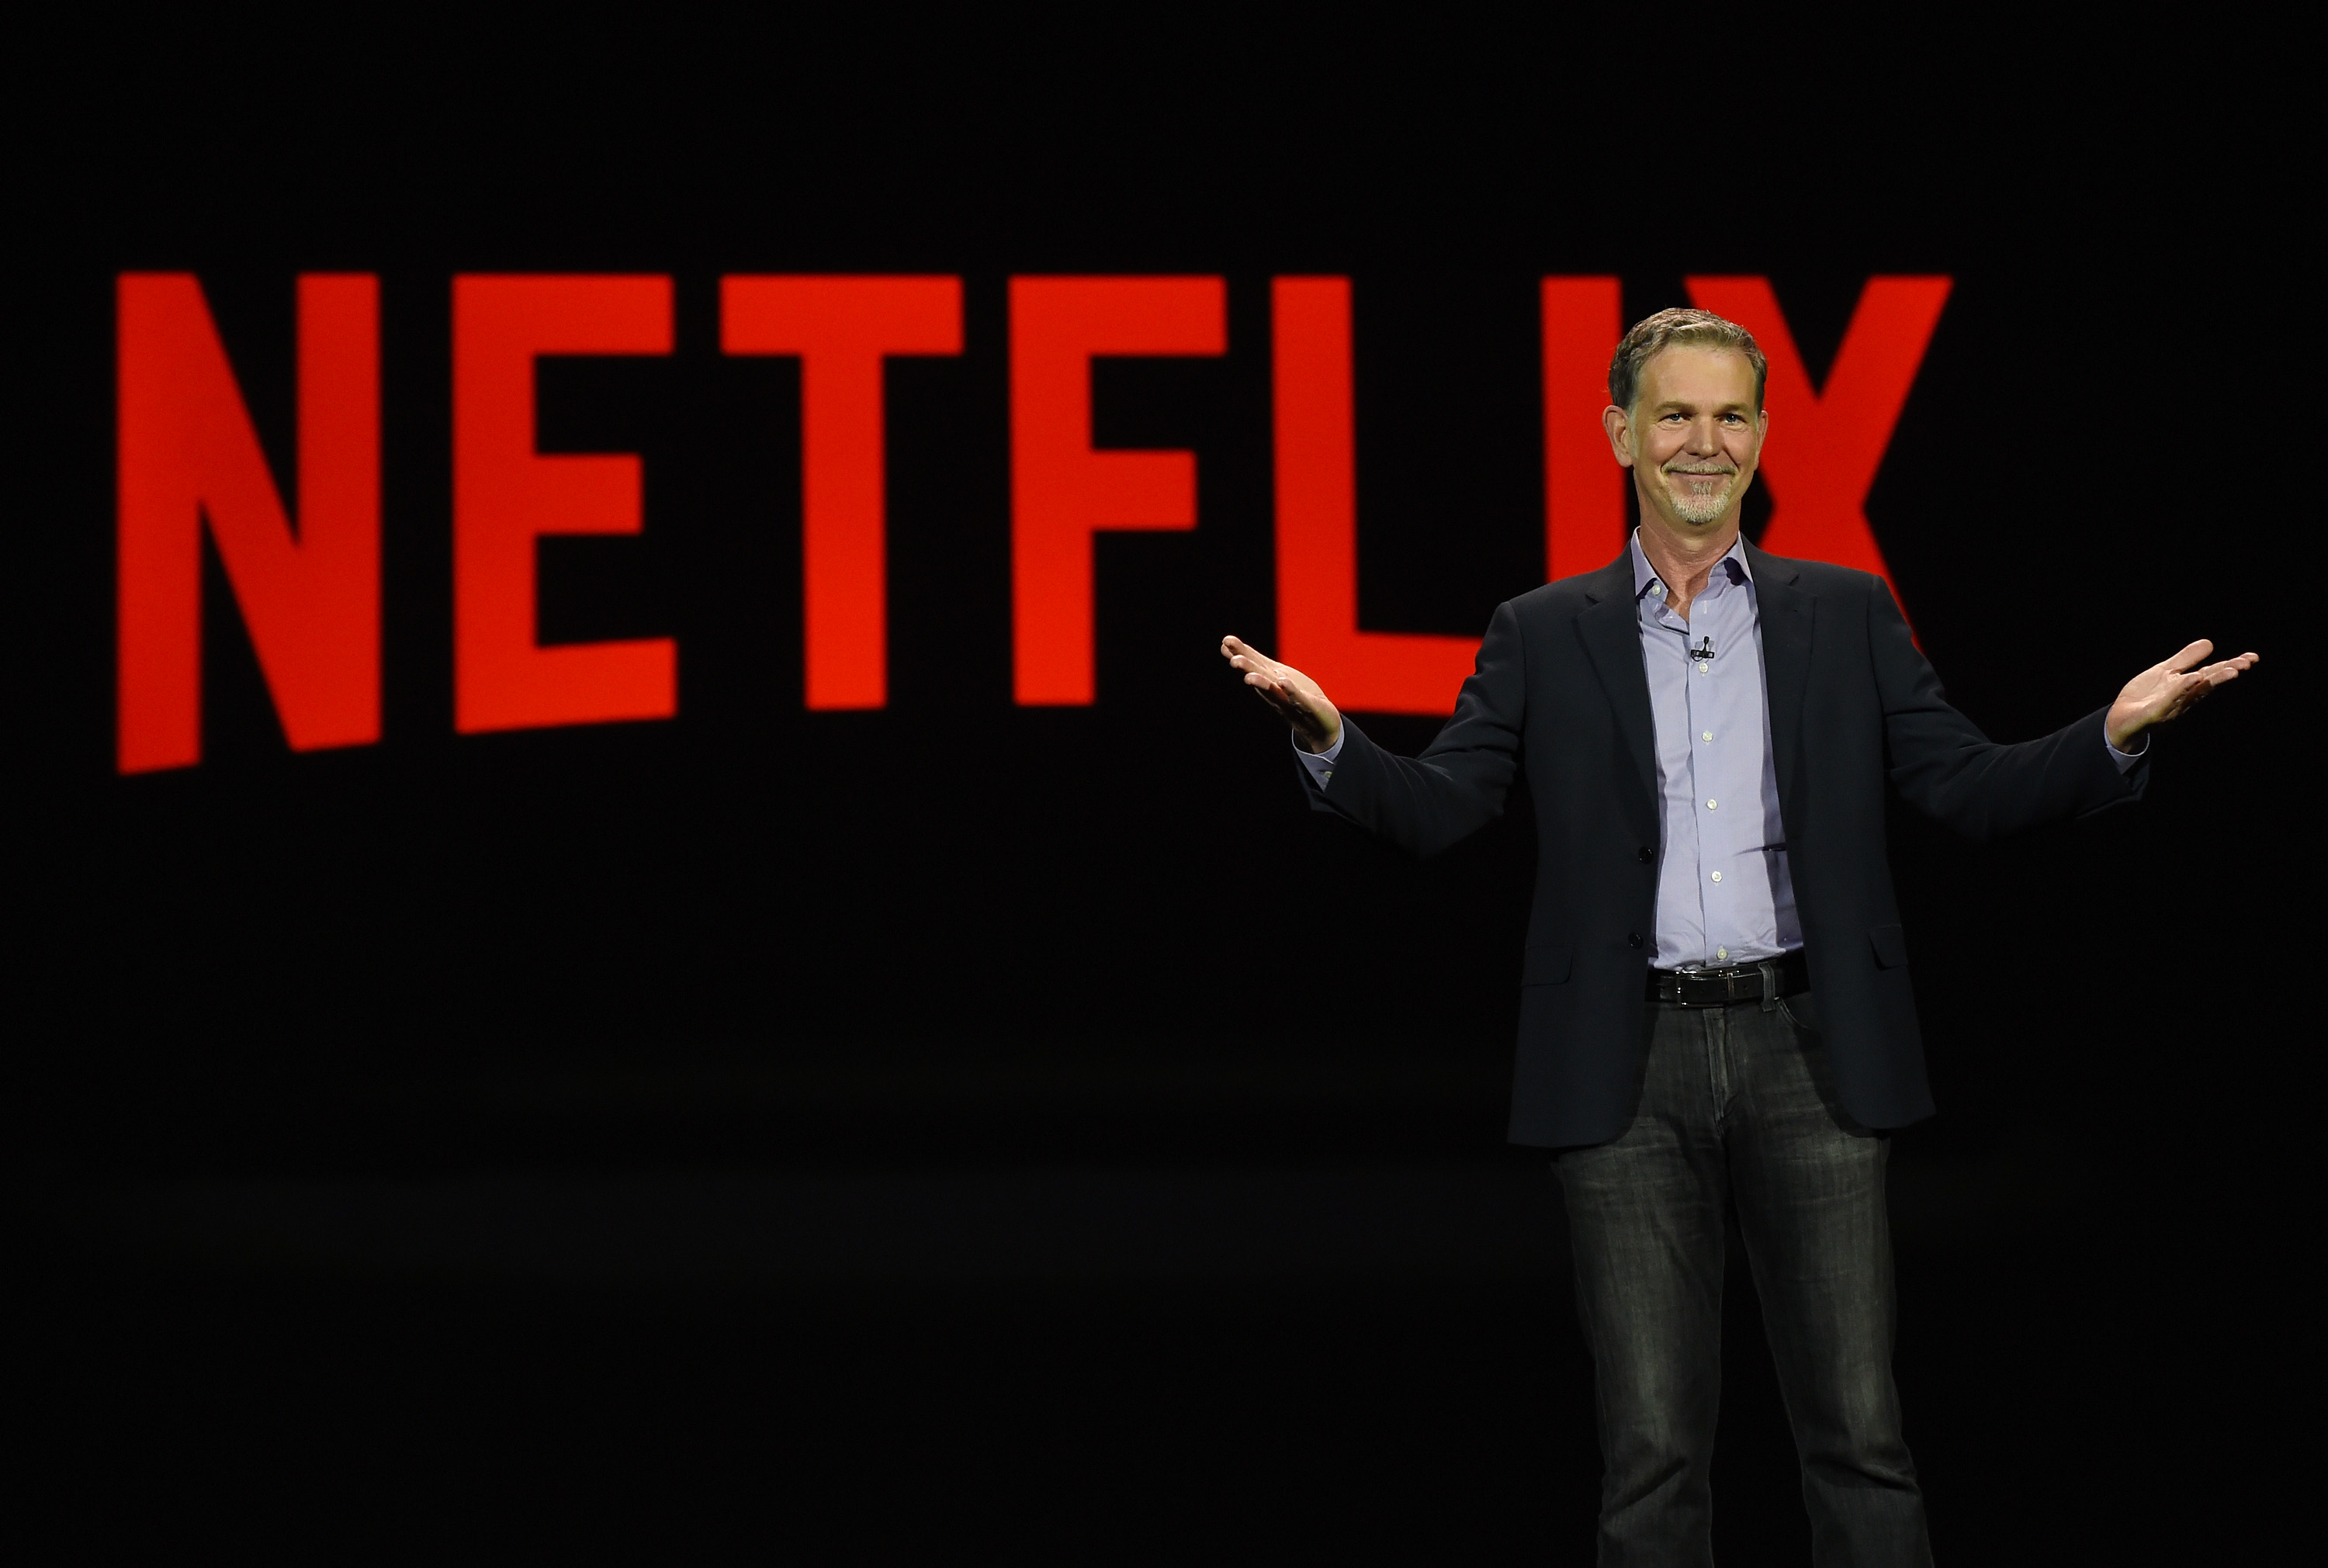 Netflix CEO Reed Hastings delivers a keynote address at CES 2016 at The Venetian Las Vegas in Las Vegas on Jan. 6, 2016. (Ethan Miller—Getty Images)